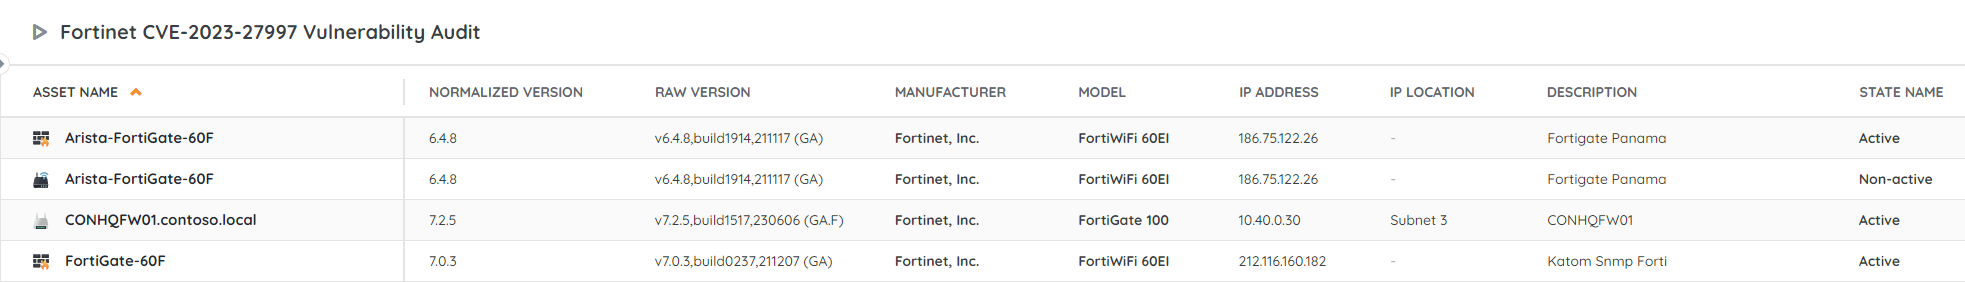 Fortinet Vulnerability Audit Report